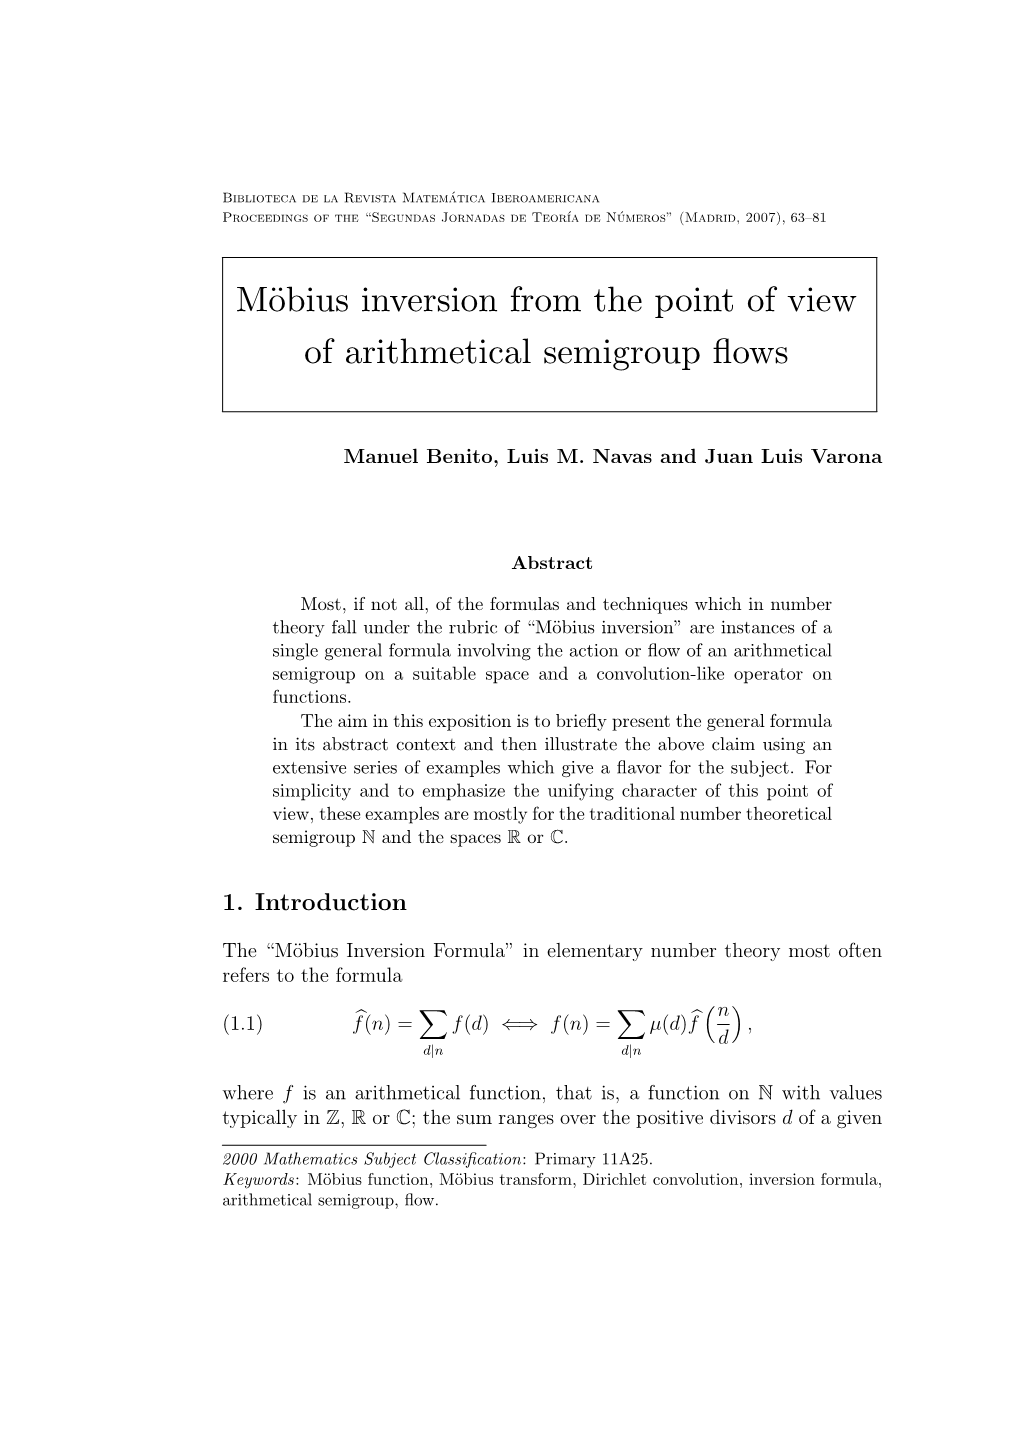 Möbius Inversion from the Point of View of Arithmetical Semigroup Flows